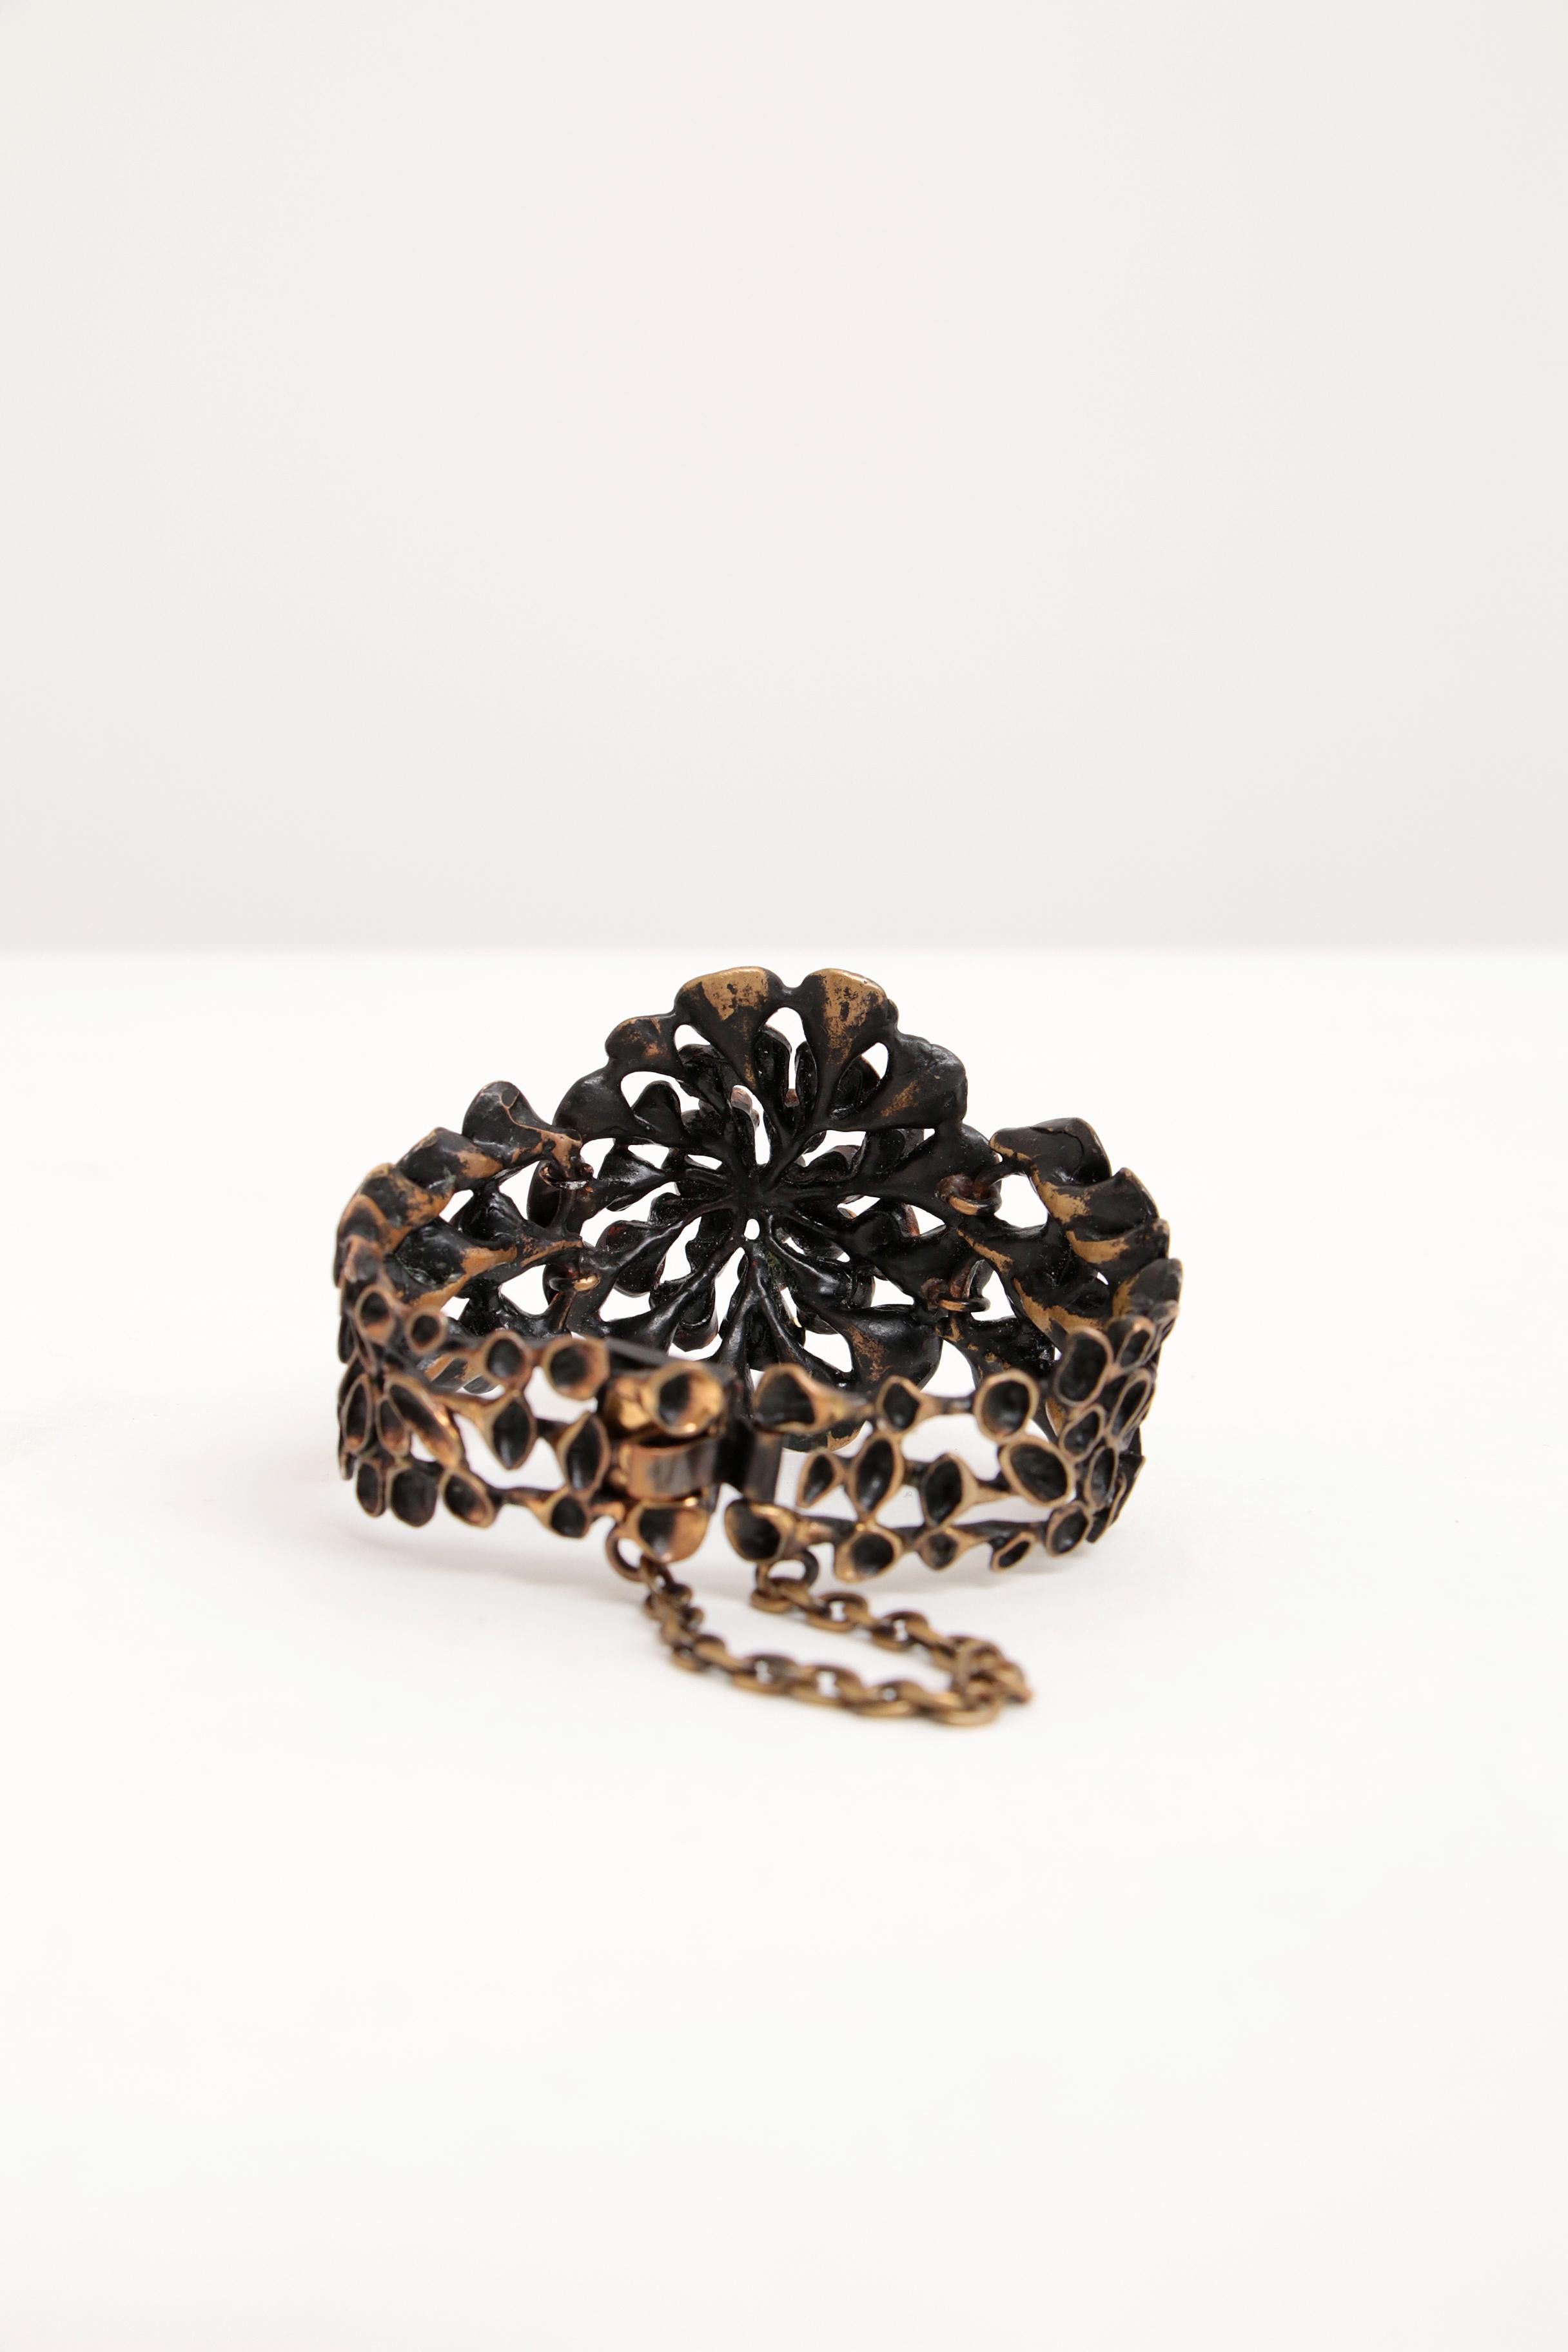 Beautiful large modernist bronze bracelet by the Finnish designer Hannu Ikonen with the typical cup moss or reindeer moss motif. This bracelet was made in the 1970s by the producer Valo-koru Oy. It is a very beautiful work of art

Inner size 5.8cm